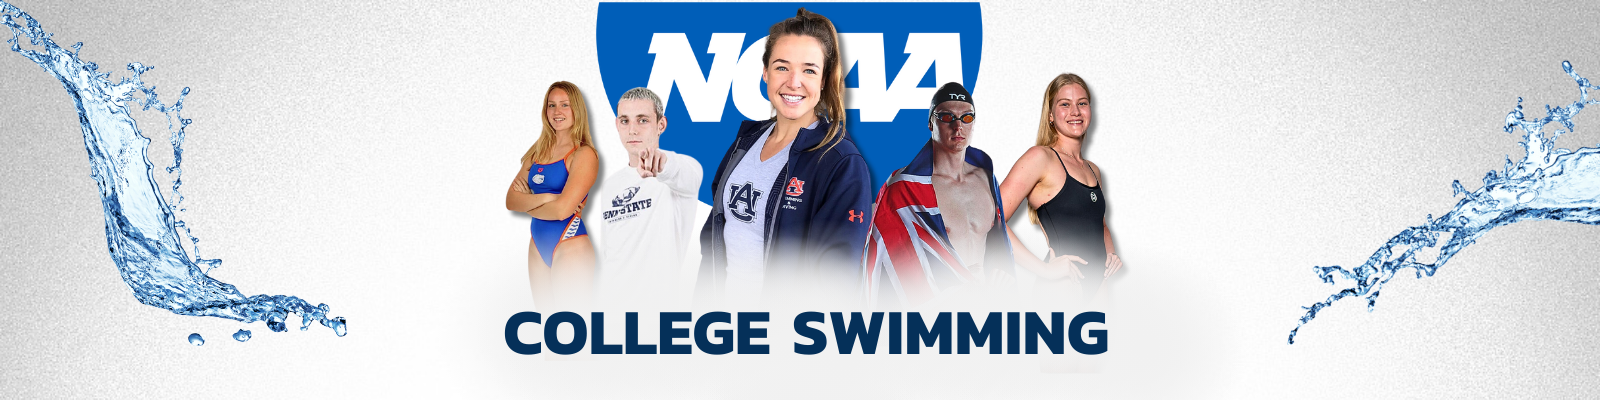 Inside college swimming event cover photo